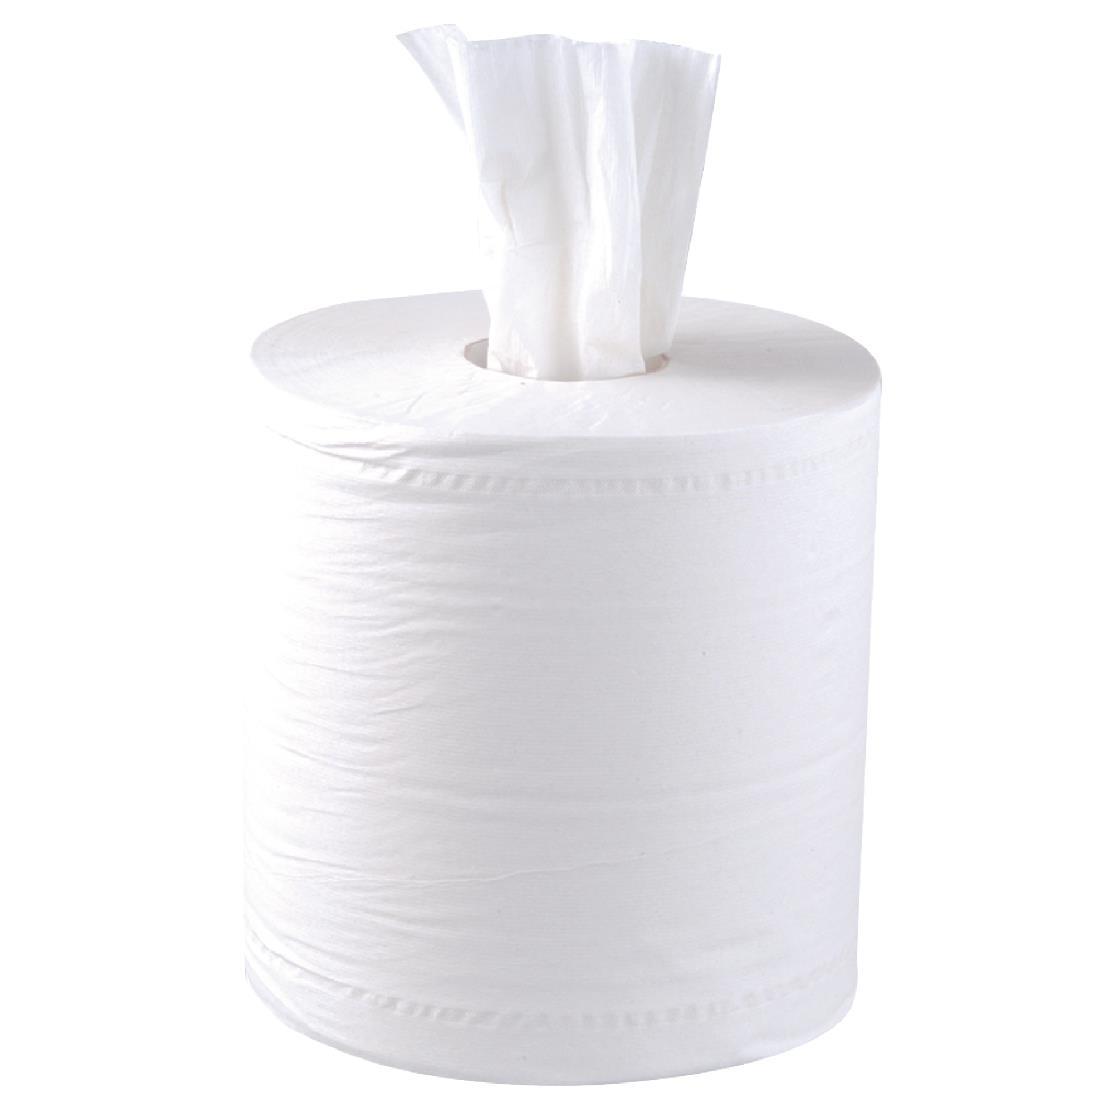 Jantex Centrefeed White Rolls 2-Ply 120m (Pack of 6) - DL920  - 5